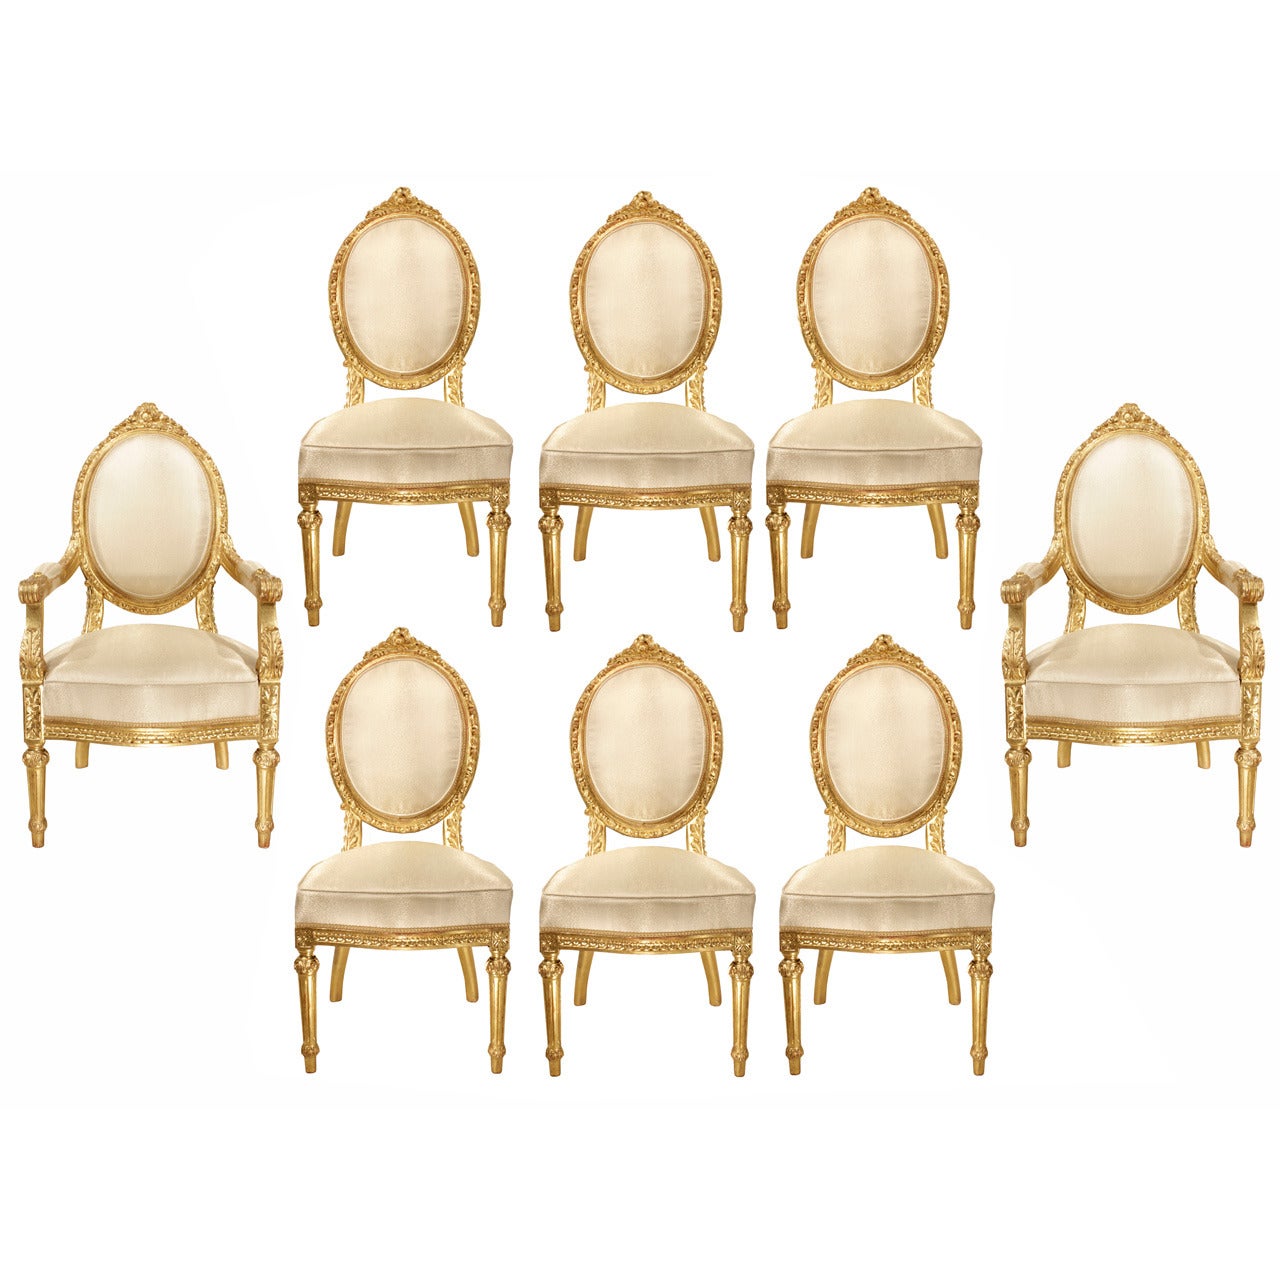 Italian Mid 19th Century Louis XVI Style Giltwood Dining Chairs